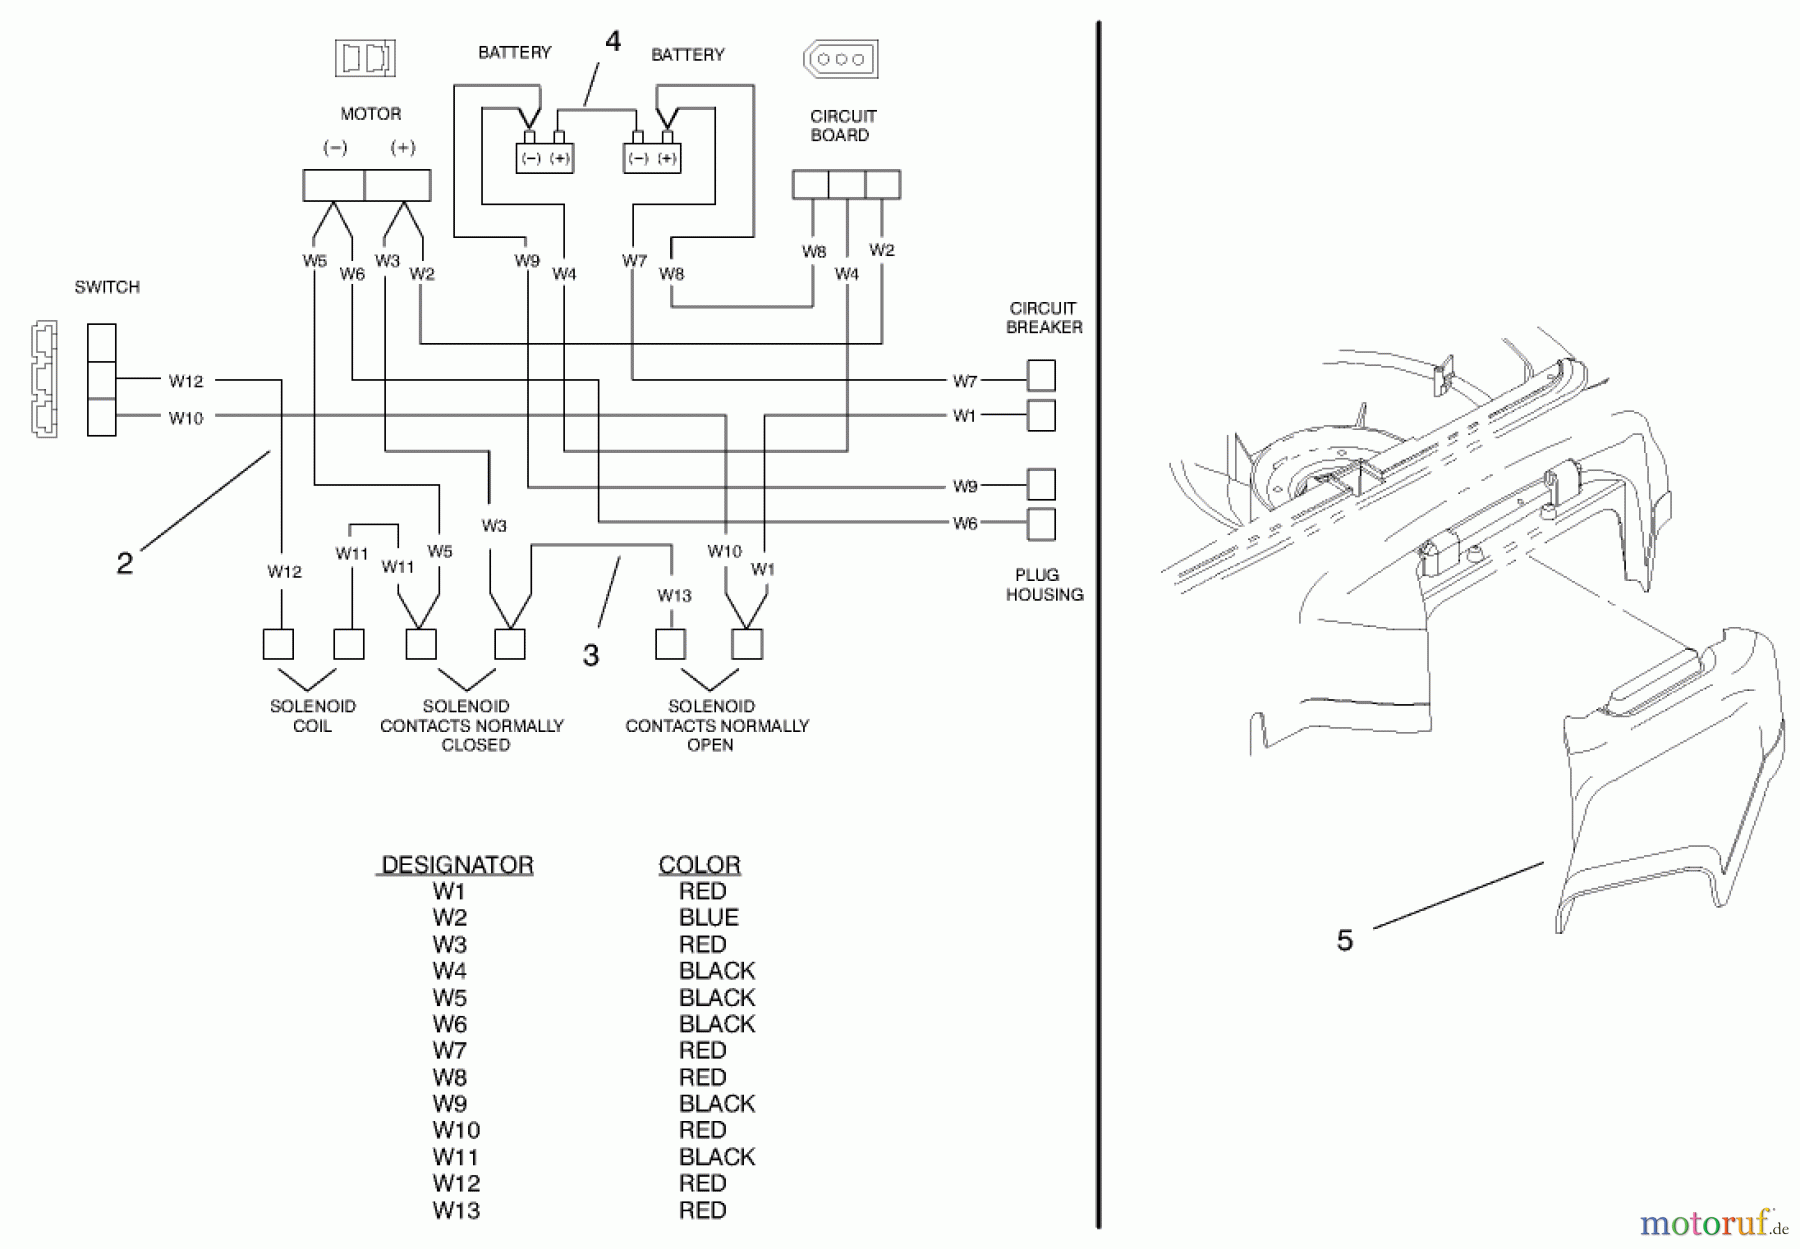  Toro Neu Mowers, Electric 20647 - Toro Carefree Electric WPM, 24 VDC, 1997 (7900001-7999999) ELECTRICAL WIRE DIAGRAM AND SIDE DISCHARGE CHUTE